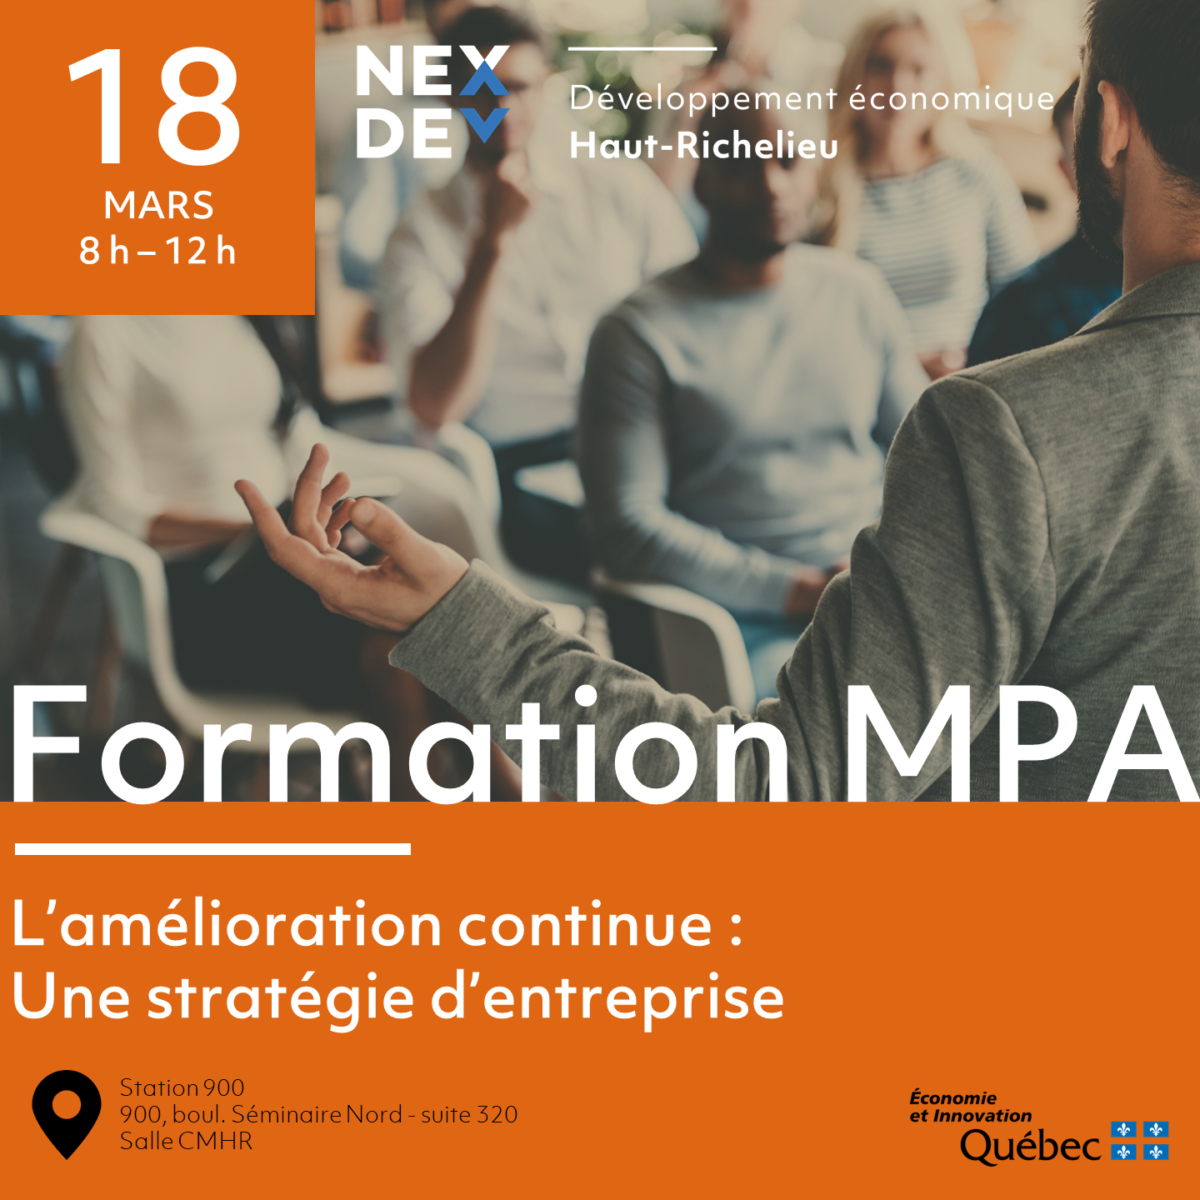 Nexdev-formation-MPA-amelioration-continue